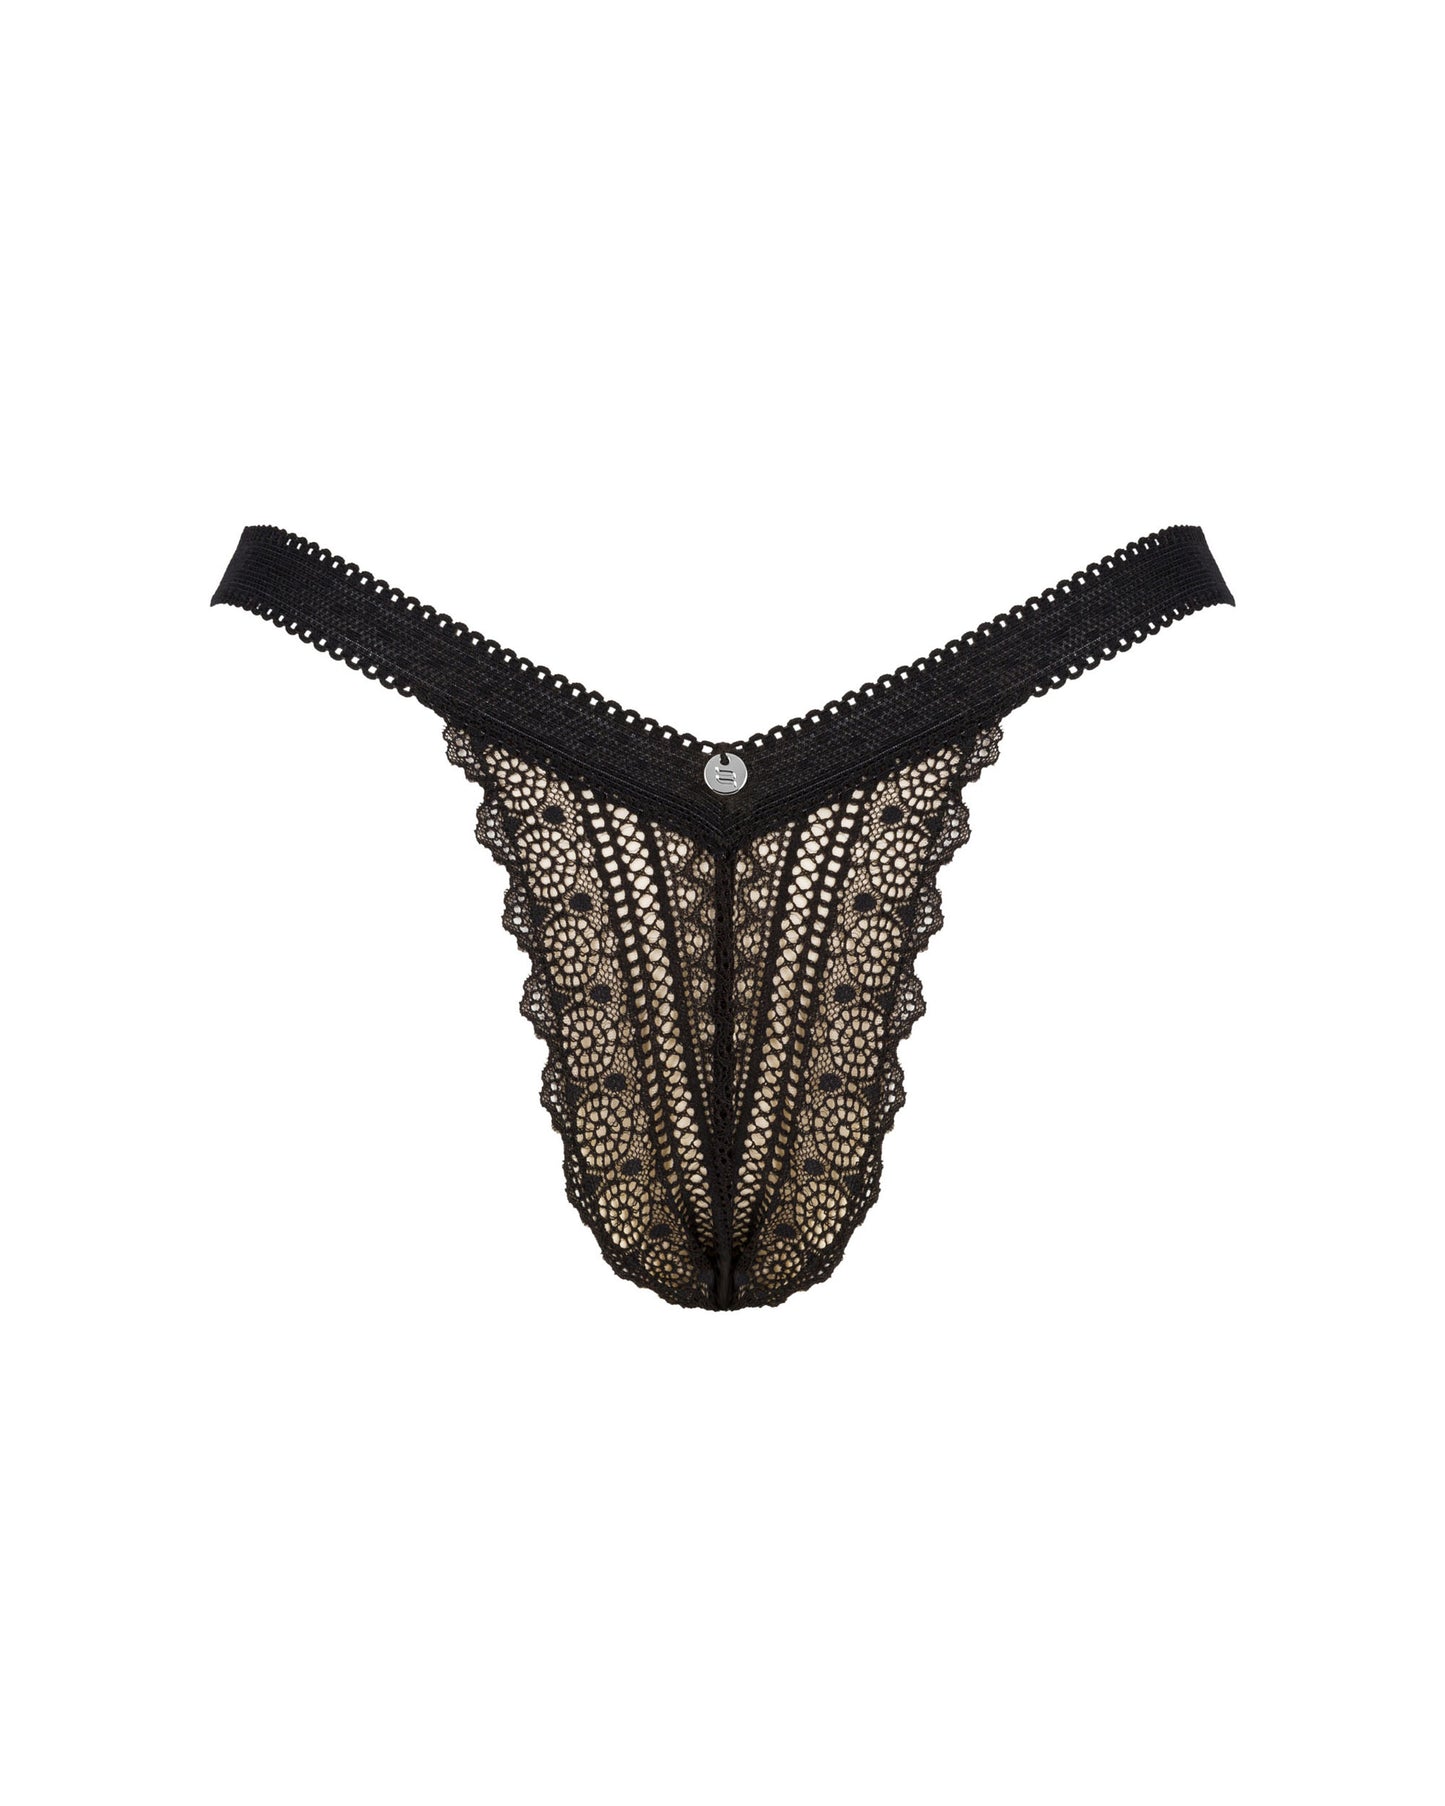 Estiqua a seductive panty made of elastic and soft material with elegant lace details and a silver-colored pendant on the front